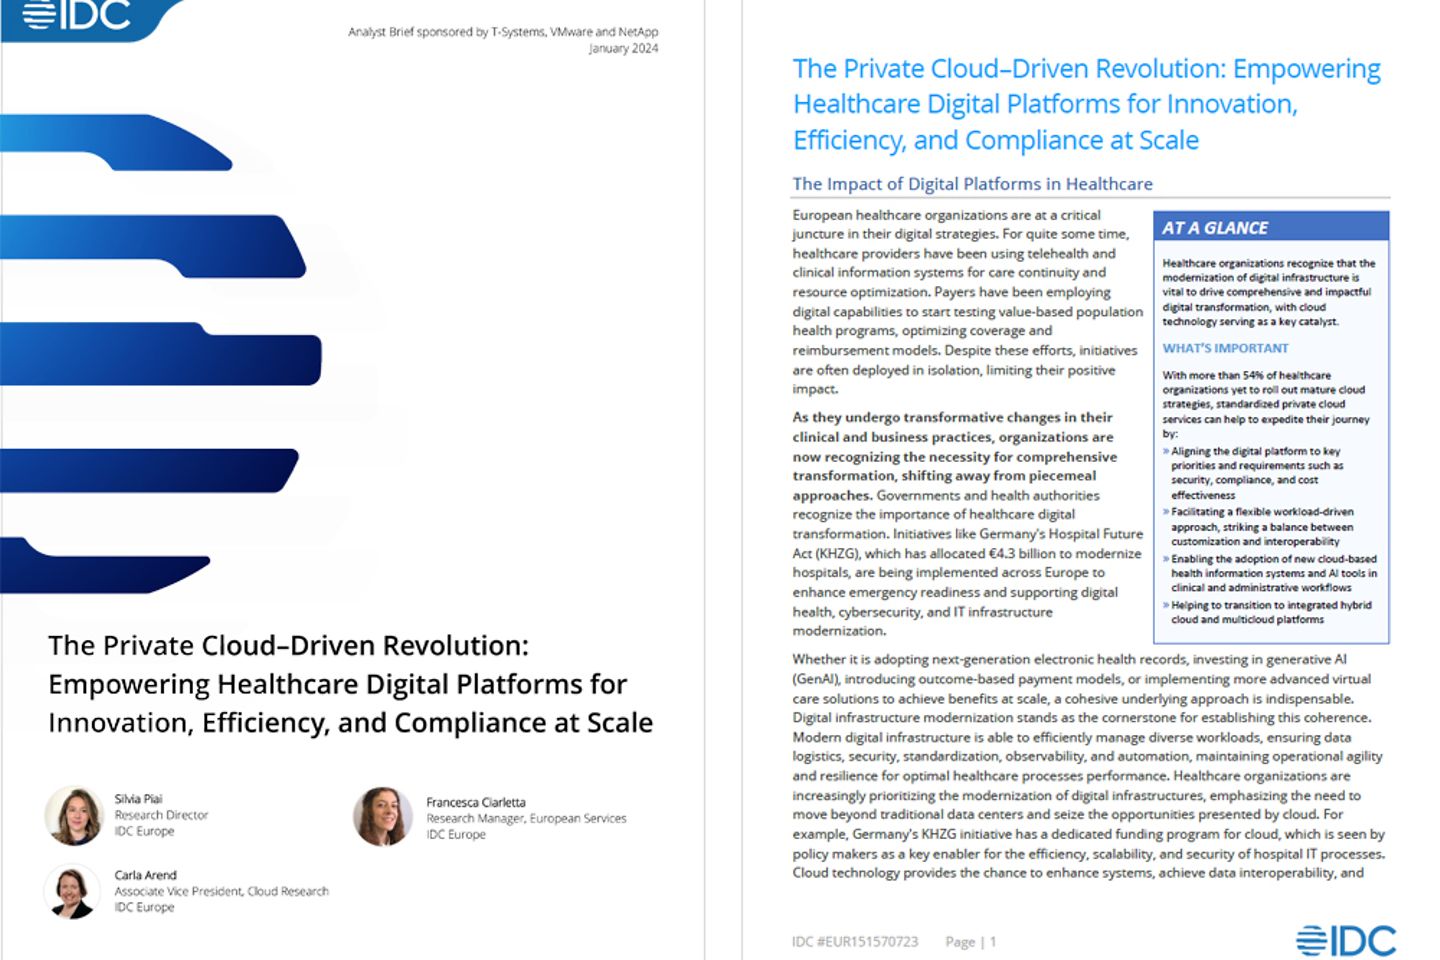 Cover and the next page as a screenshot showing the IDC Report: The Private Cloud-Driven Revolution